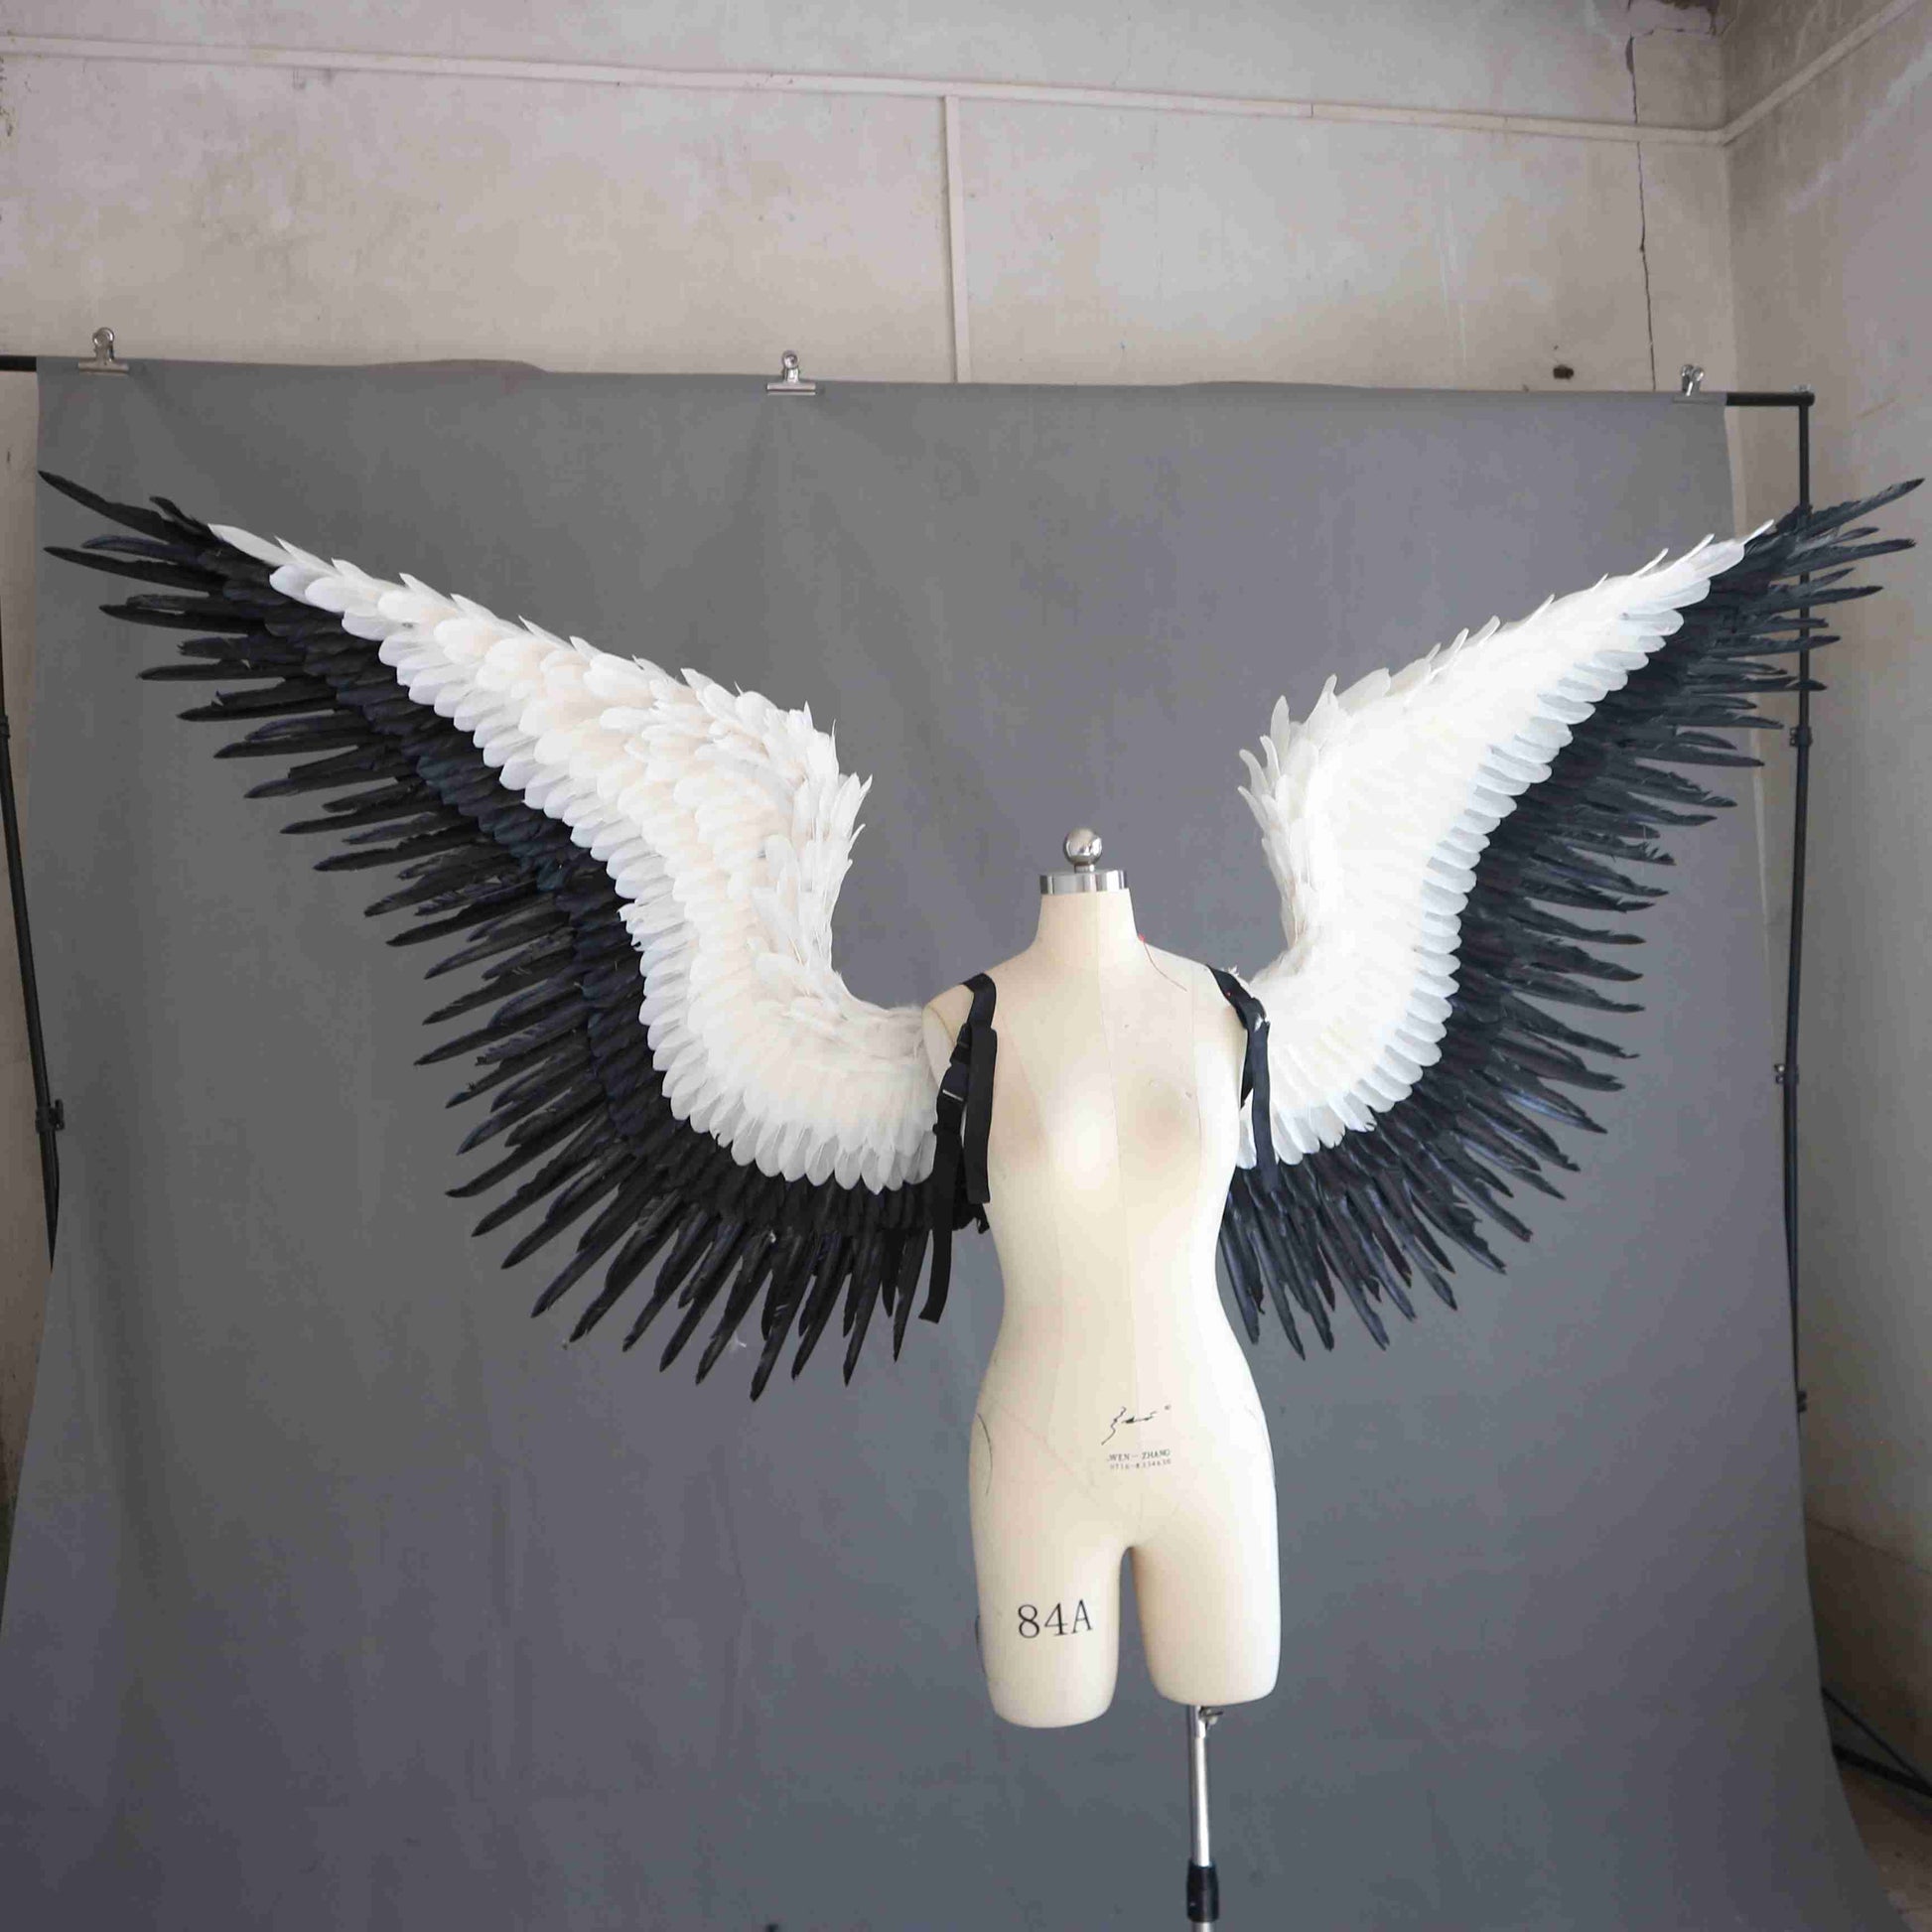 Our black white angel wings from the right. Made from goose feathers. Wings for angel wings costume or devil wings costume. Suitable for photoshoots.